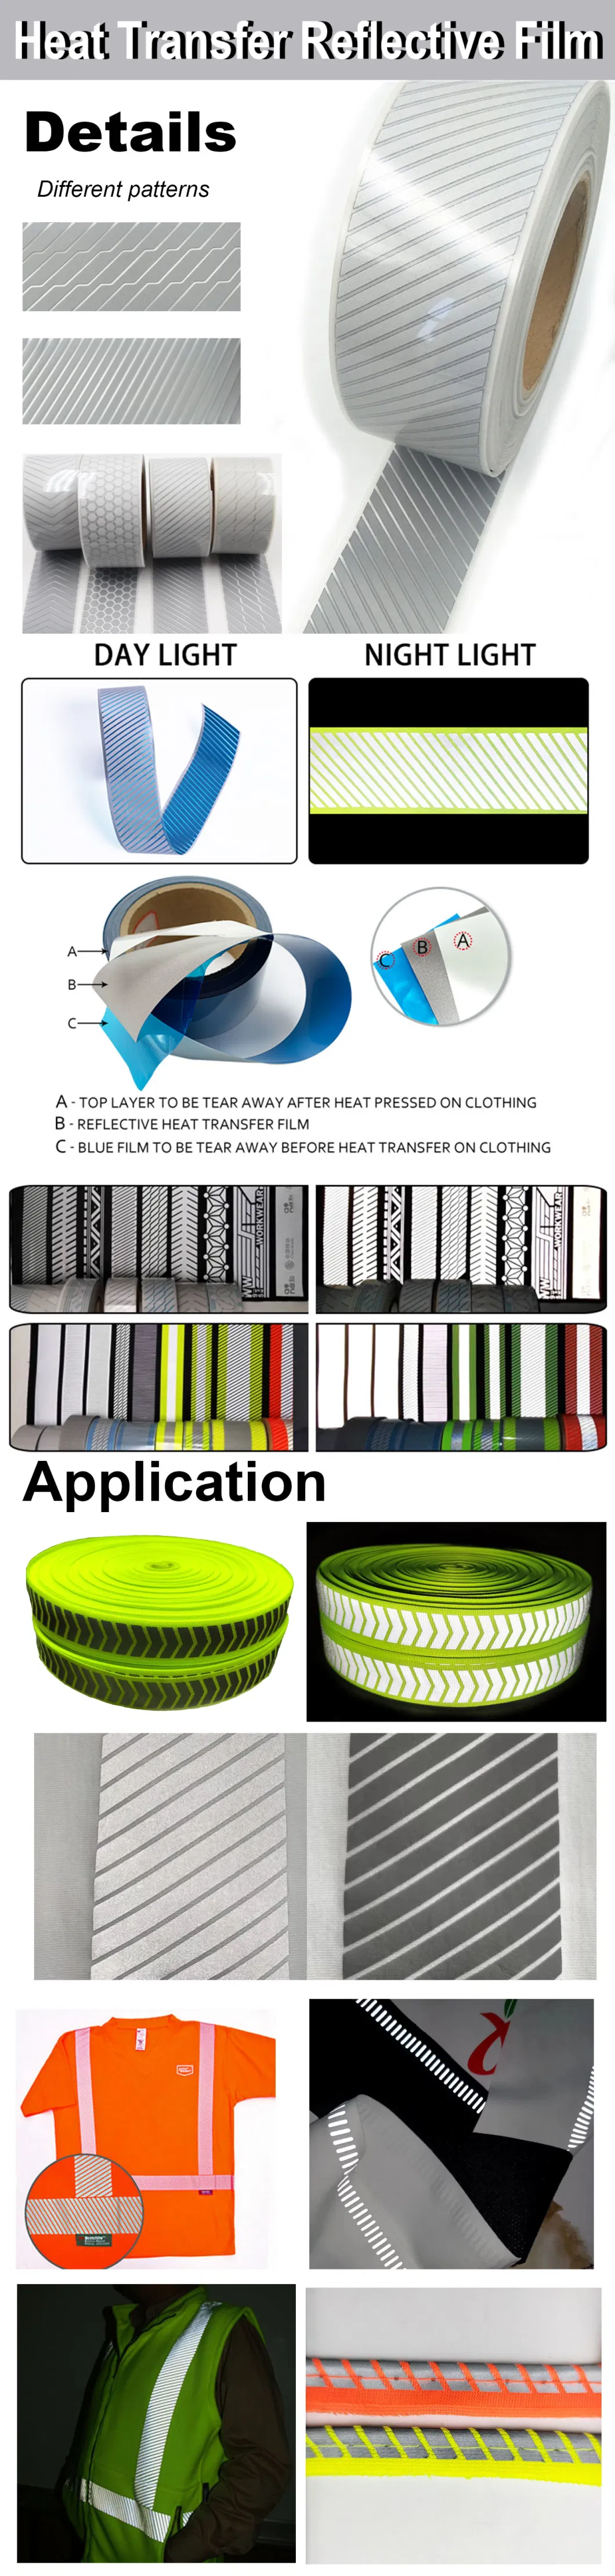 Special Printing 100%Polyester Silver High Reflectivity Iron on Clothing/Heat Transfer Reflective Film